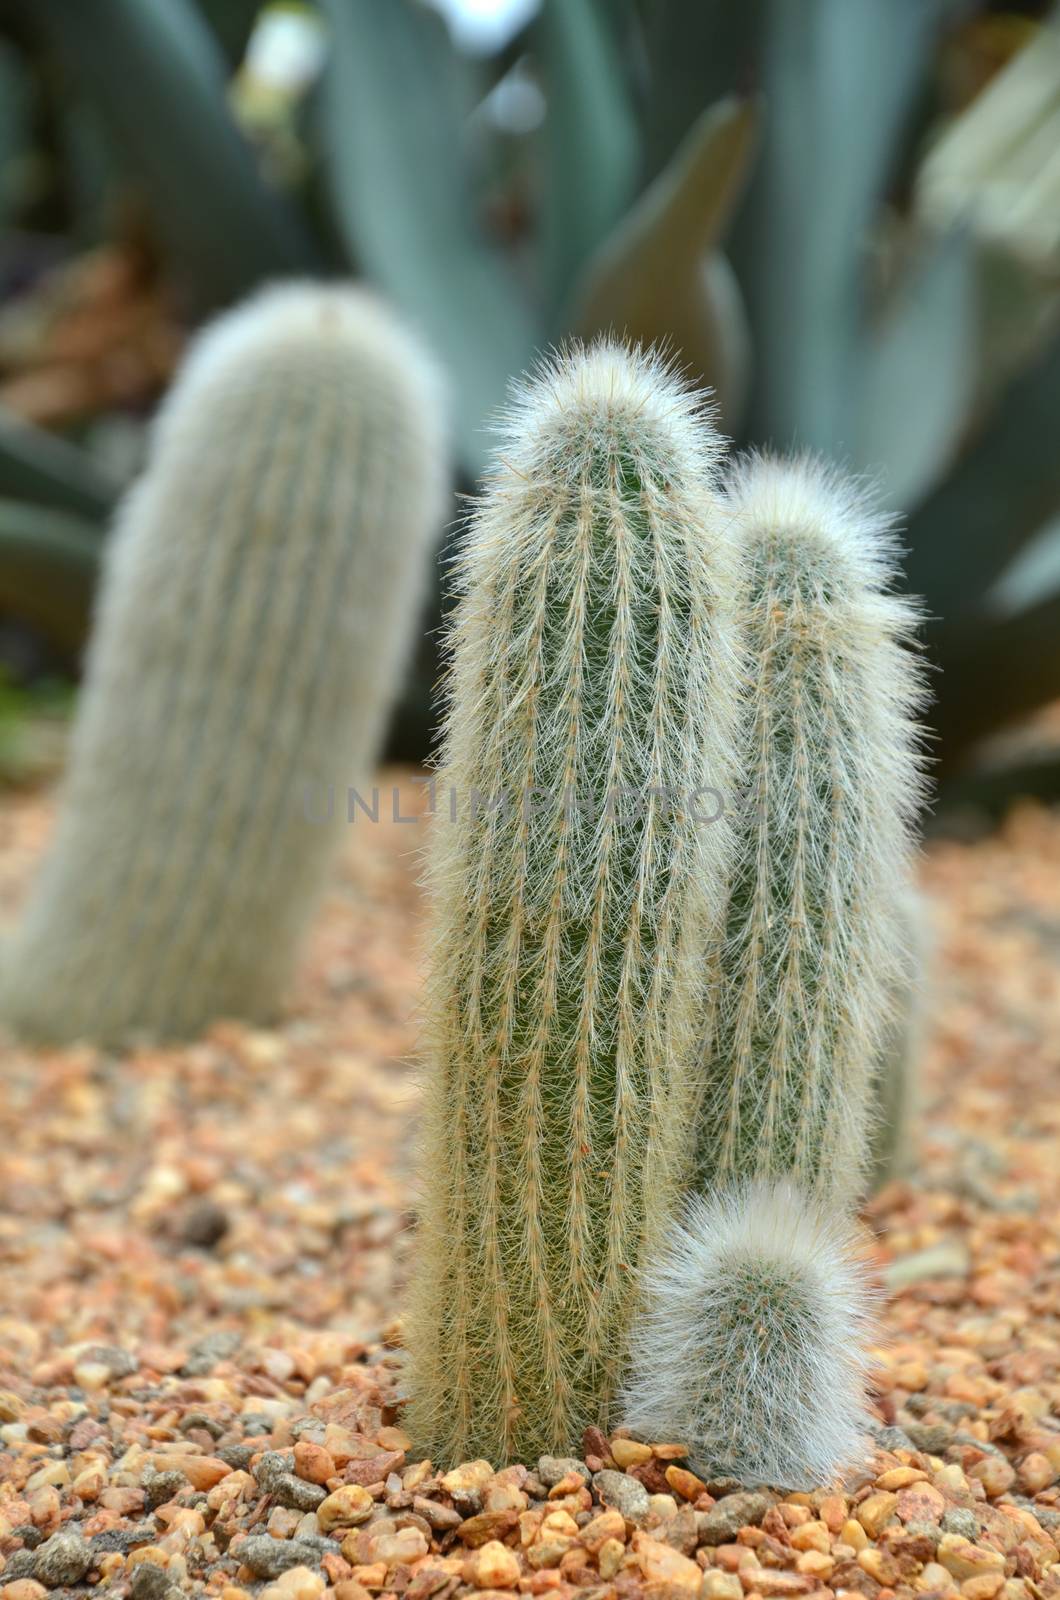 Cleistocactus strausii is a perennial cactus of the family Cactaceae.